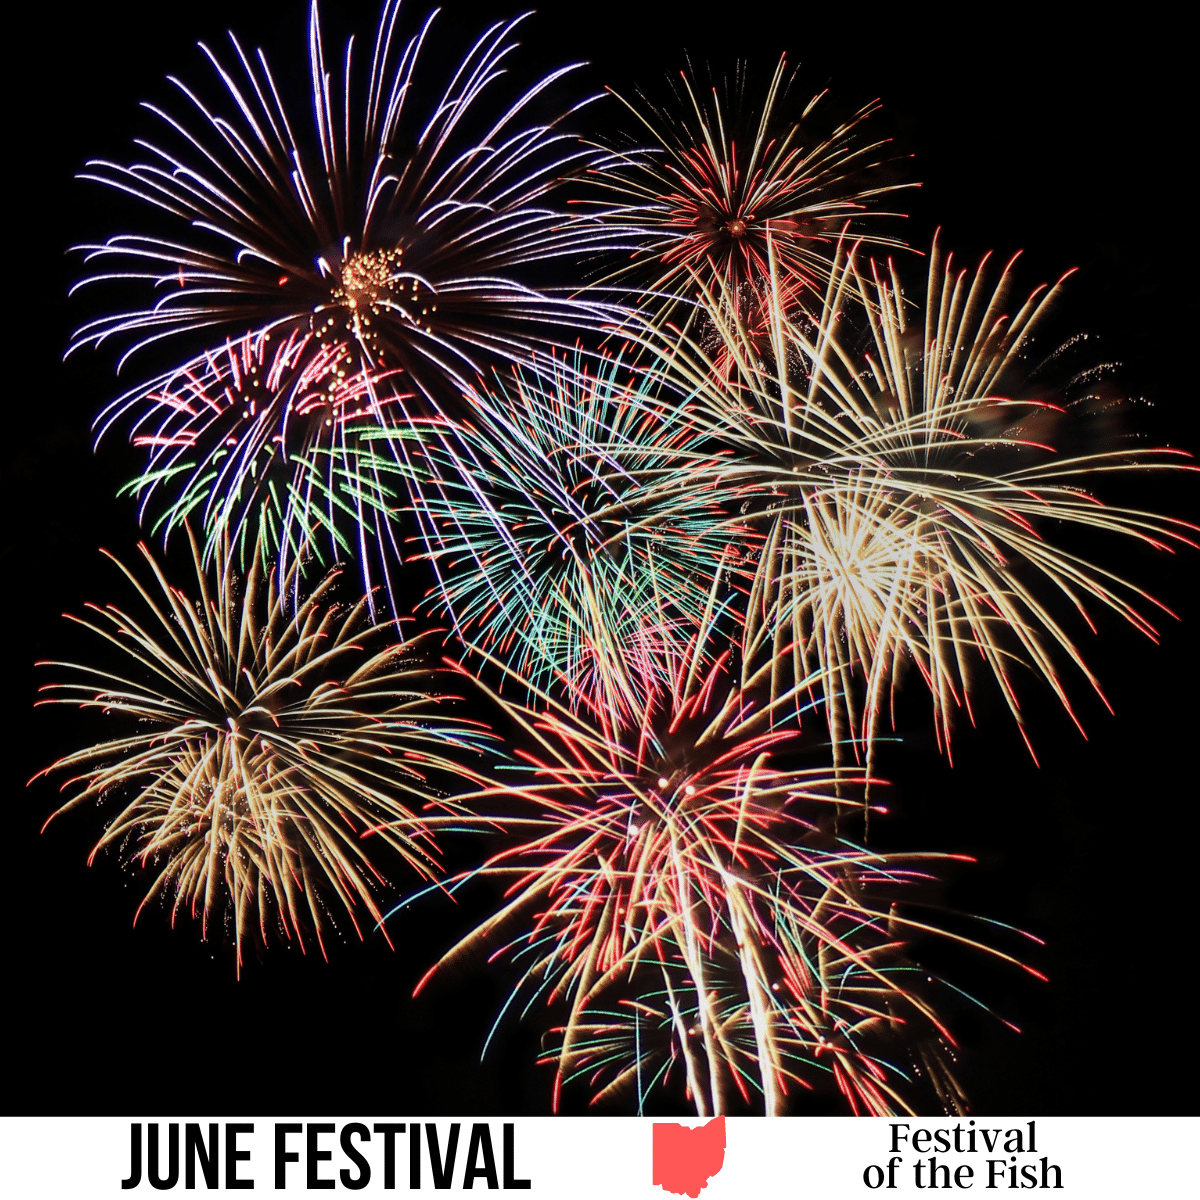 A square image of a photo of fireworks against a black background. A white strip across the bottom has text June Festival -Festival of the Fish.